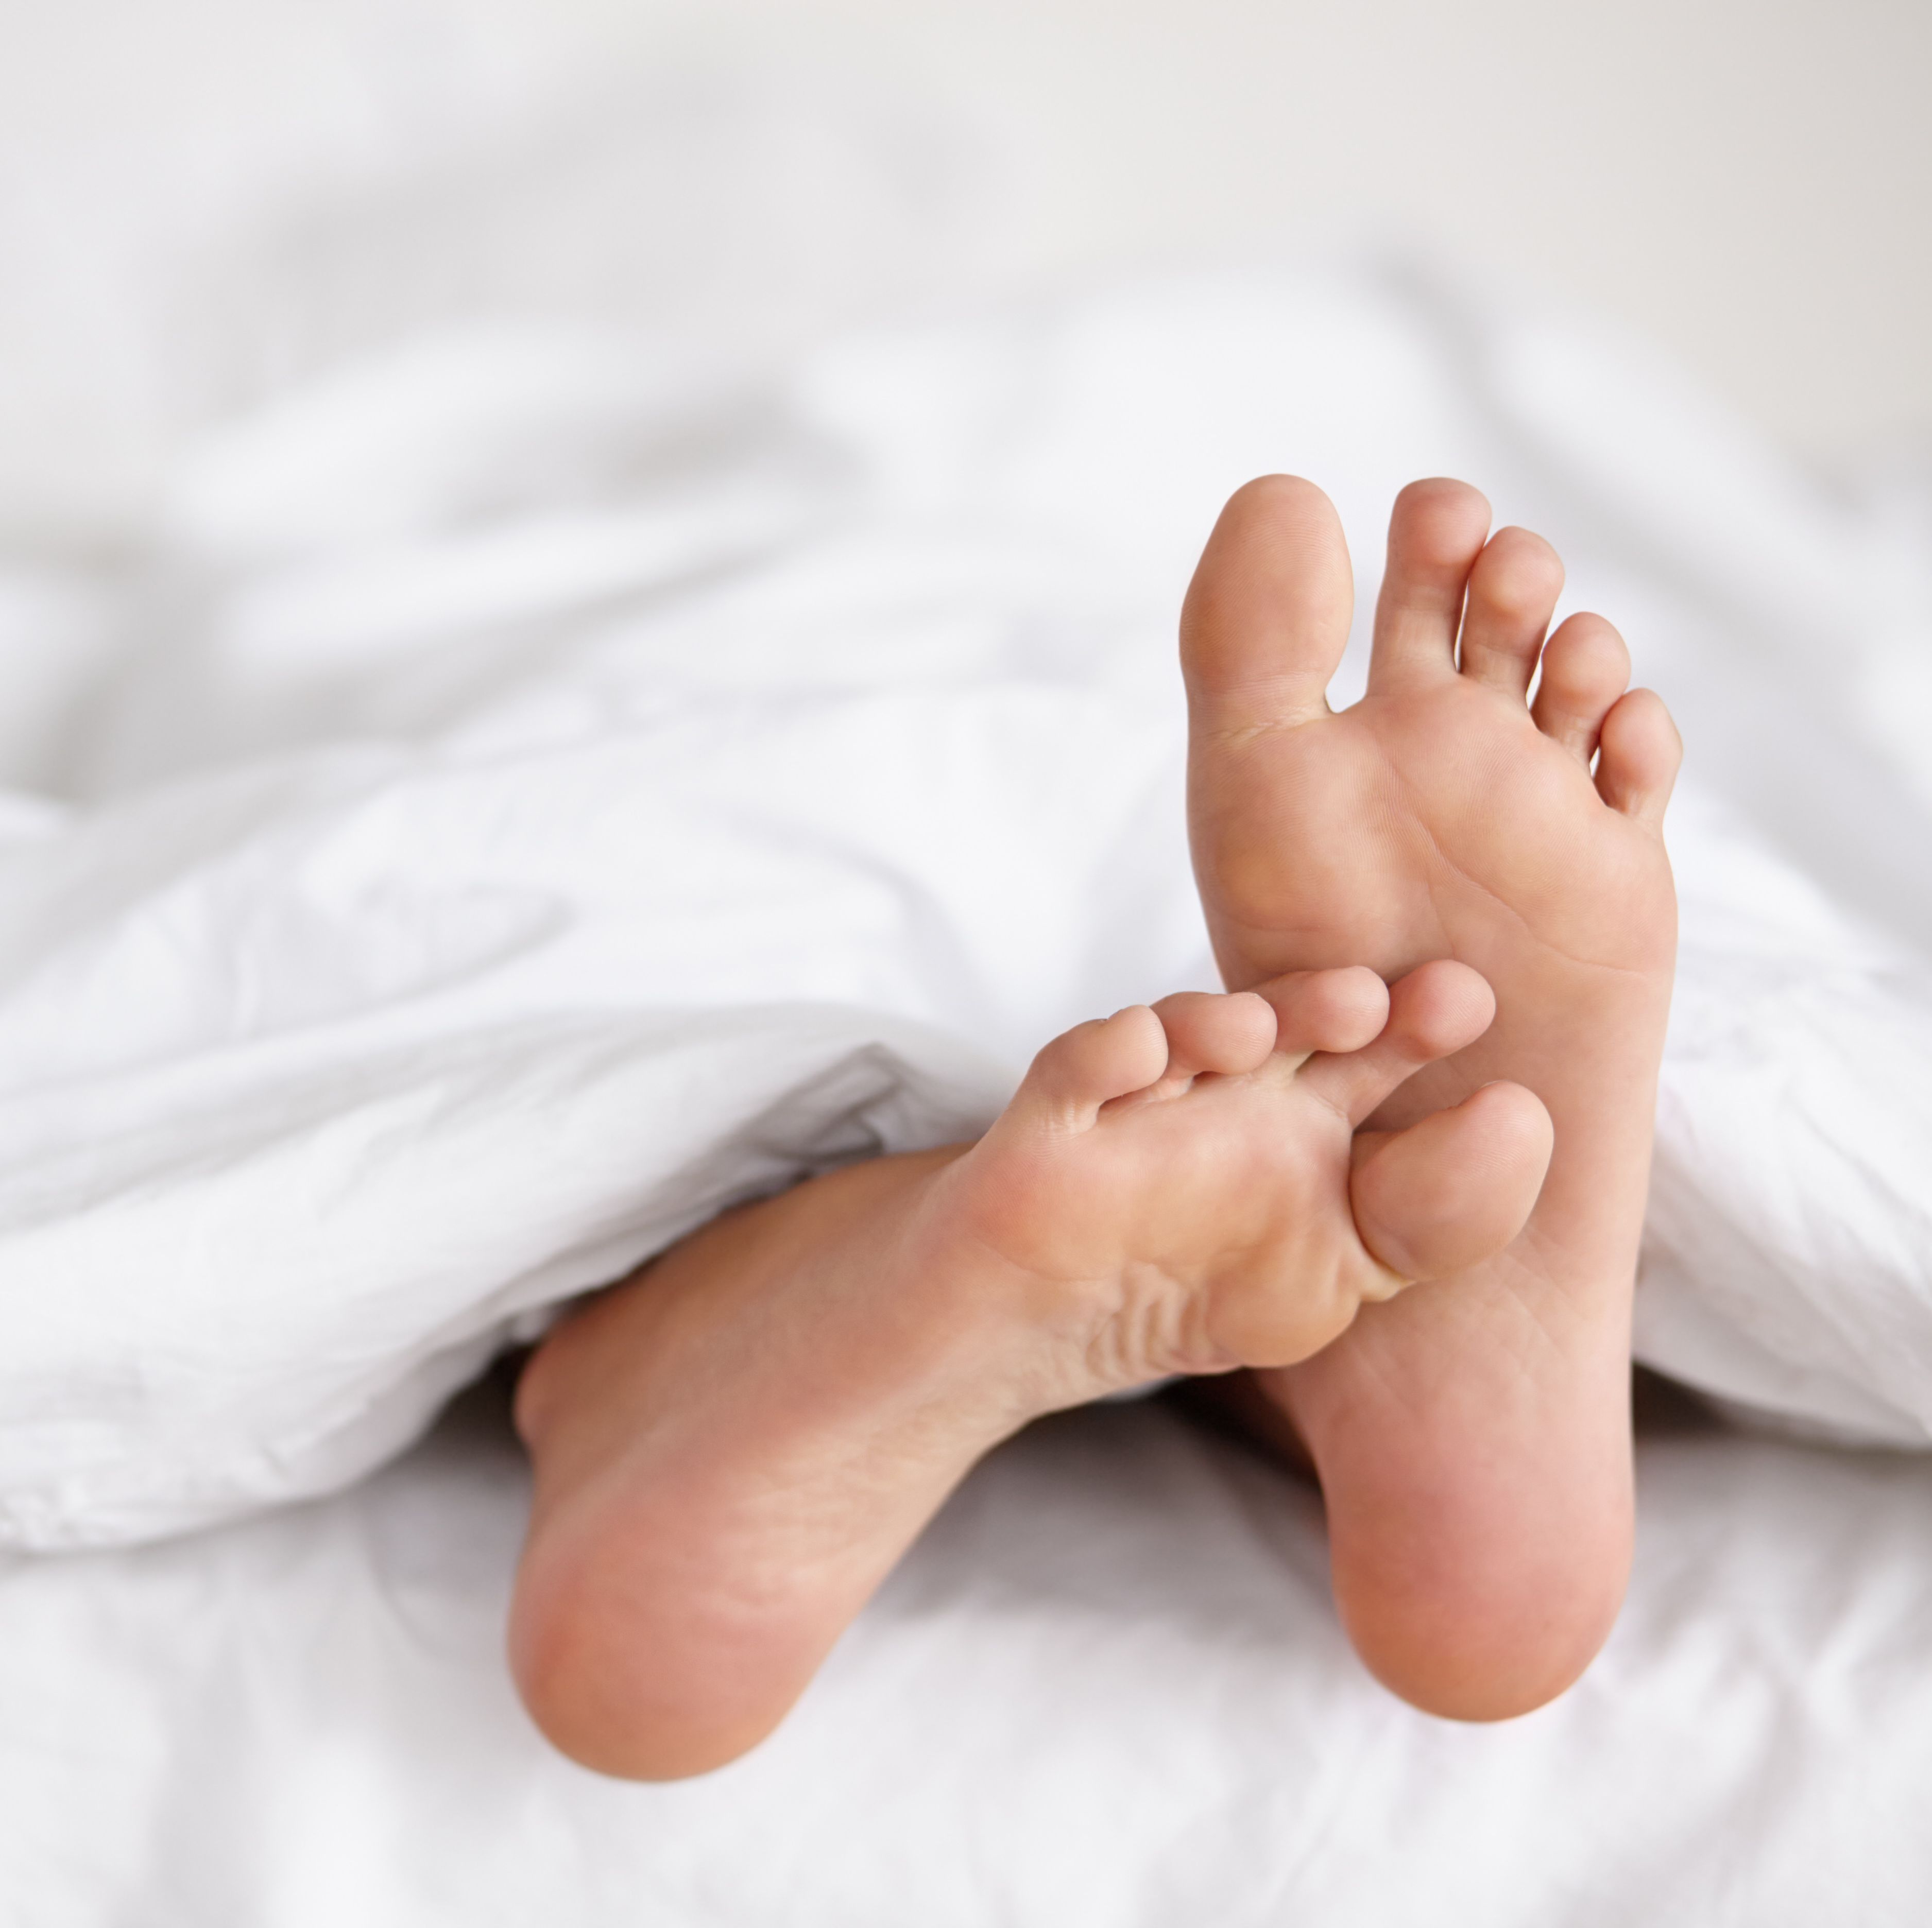 The Real Reason Why Your Feet Are So Itchy, According to Experts